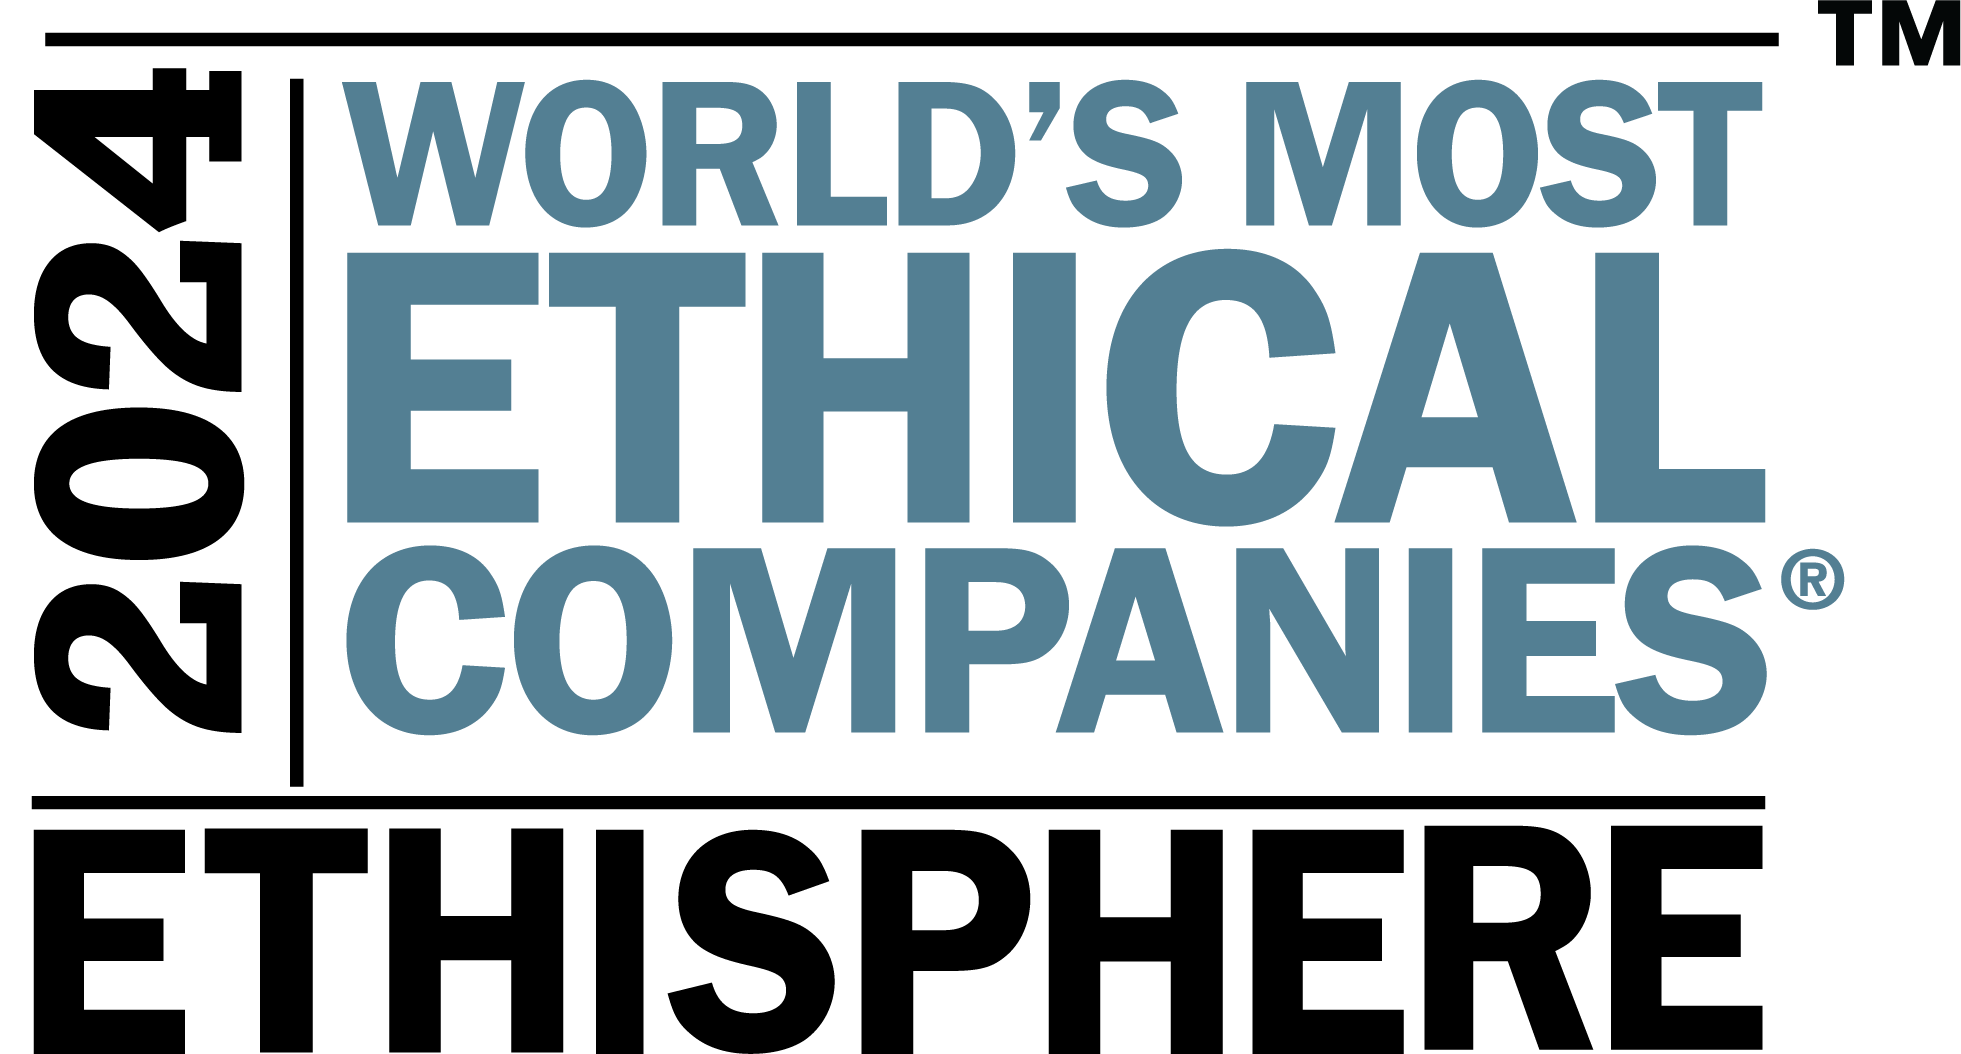 World’s Most Ethical Companies logo